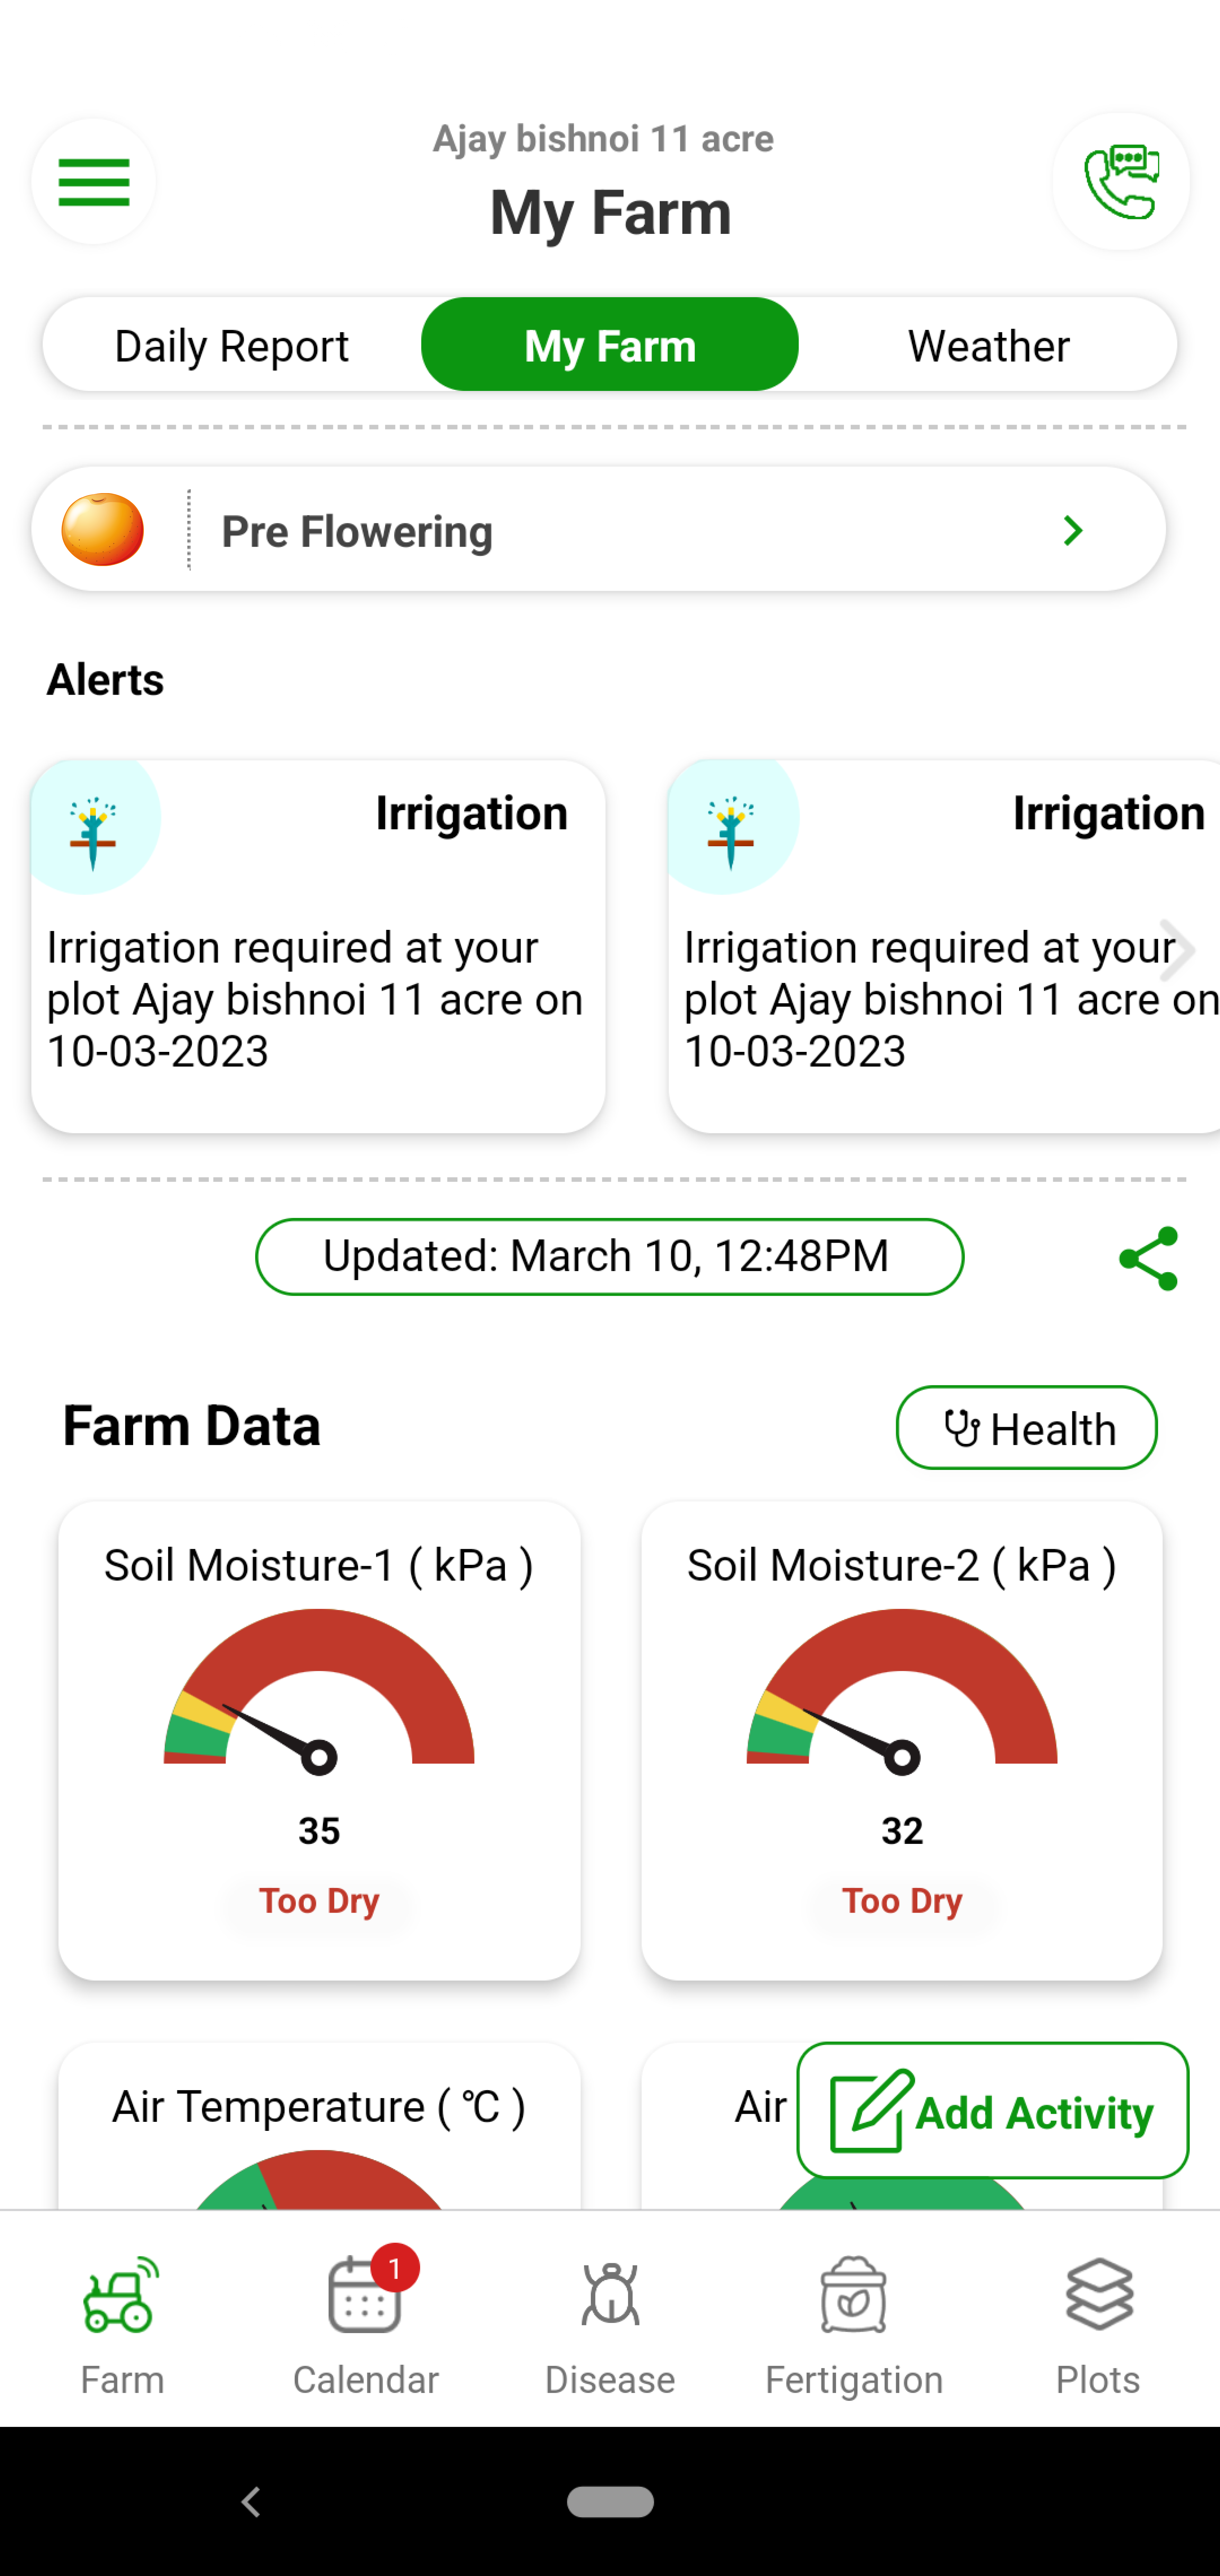 Citrus’s water requirements vary based on soil type and stage. Water requirement also change from one variety to other and also your flowering time or season. With Fyllo’s device containing soil moisture and soil temperature sensor and intelligent software, you get alerts on how much water to provide to the crop. You can also see and visualize evapotranspiration (Etc) values of the crop. You can perfectly manage the water requirements to beat the heat stress and maintain perfect acid/TSS ratio